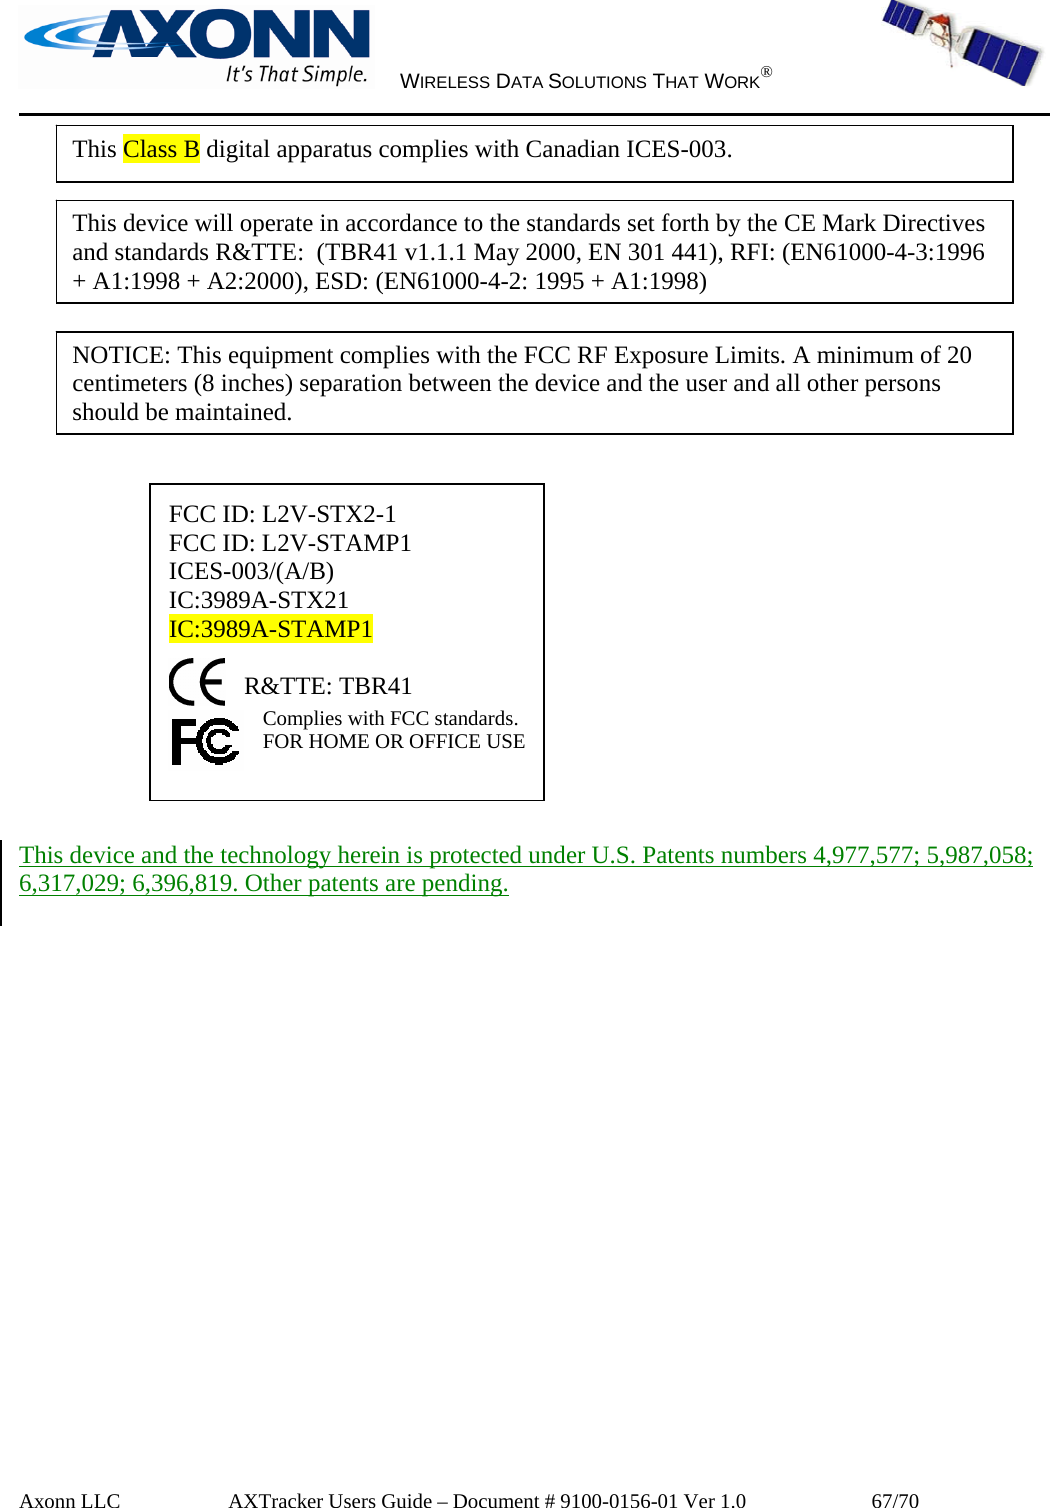     WIRELESS DATA SOLUTIONS THAT WORK®   Axonn LLC         AXTracker Users Guide – Document # 9100-0156-01 Ver 1.0                  67/70              FCC ID: L2V-STX2-1 FCC ID: L2V-STAMP1 ICES-003/(A/B) IC:3989A-STX21  IC:3989A-STAMP1  R&amp;TTE: TBR41 Complies with FCC standards.  FOR HOME OR OFFICE USE    This device and the technology herein is protected under U.S. Patents numbers 4,977,577; 5,987,058; 6,317,029; 6,396,819. Other patents are pending.  This device will operate in accordance to the standards set forth by the CE Mark Directives and standards R&amp;TTE:  (TBR41 v1.1.1 May 2000, EN 301 441), RFI: (EN61000-4-3:1996 + A1:1998 + A2:2000), ESD: (EN61000-4-2: 1995 + A1:1998)This Class B digital apparatus complies with Canadian ICES-003. NOTICE: This equipment complies with the FCC RF Exposure Limits. A minimum of 20 centimeters (8 inches) separation between the device and the user and all other persons should be maintained. 